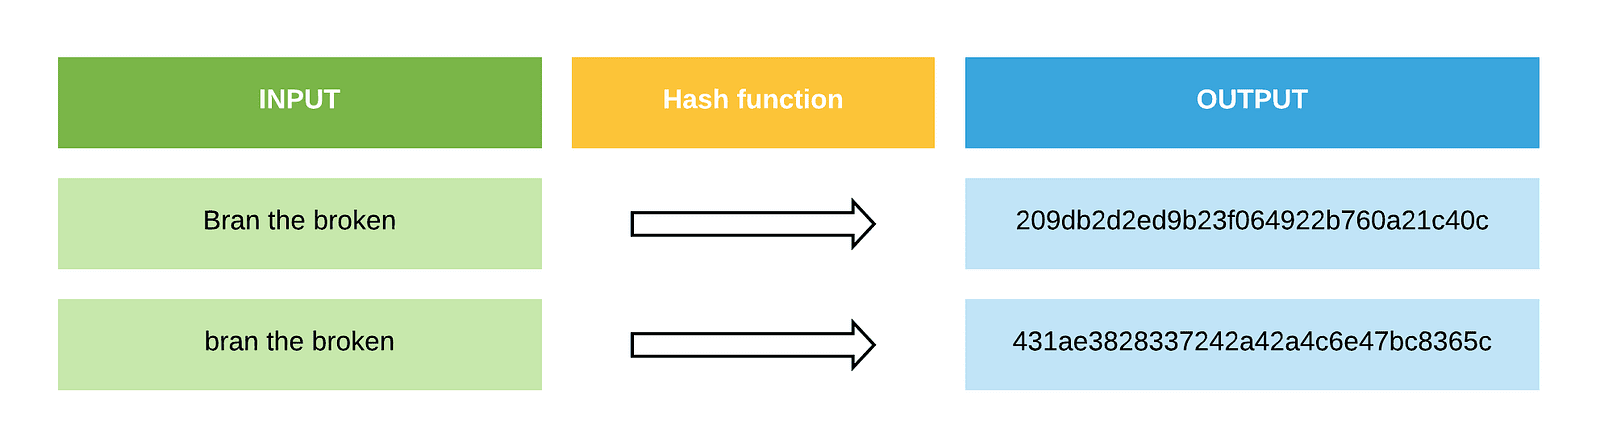 Mastering Hash Functions in C: SHA-256 and MD5 Demystified